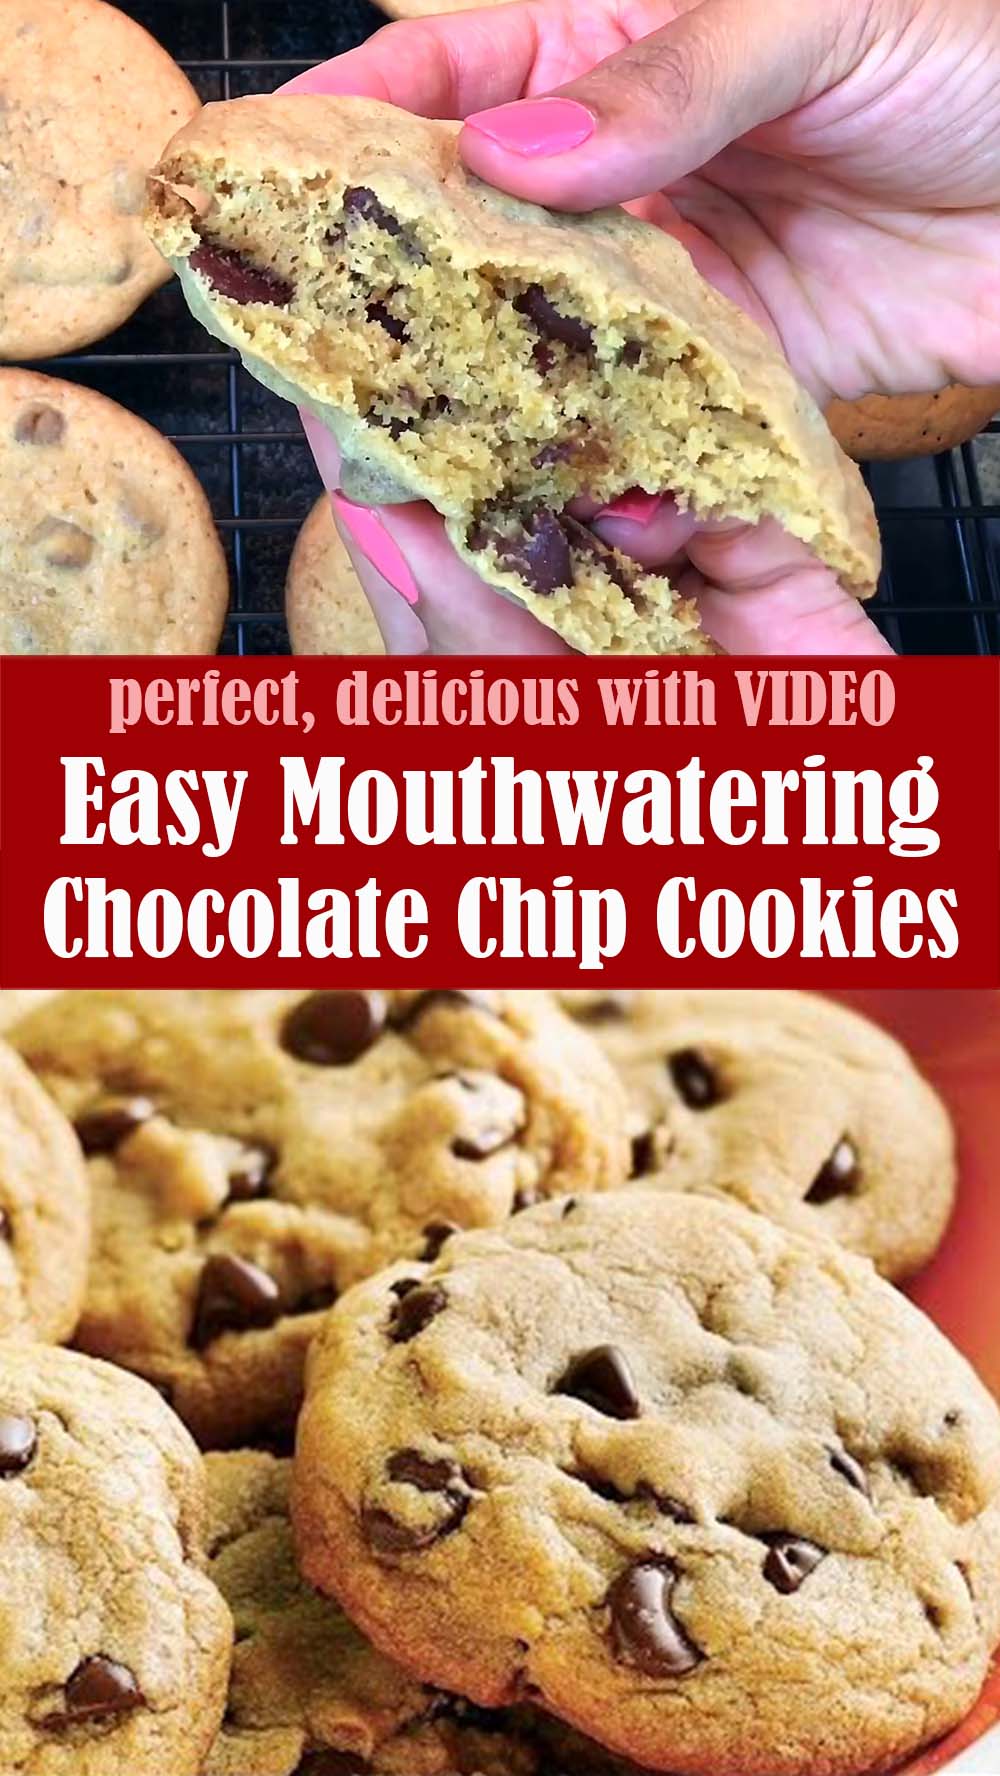 Easy Mouthwatering Chocolate Chip Cookies